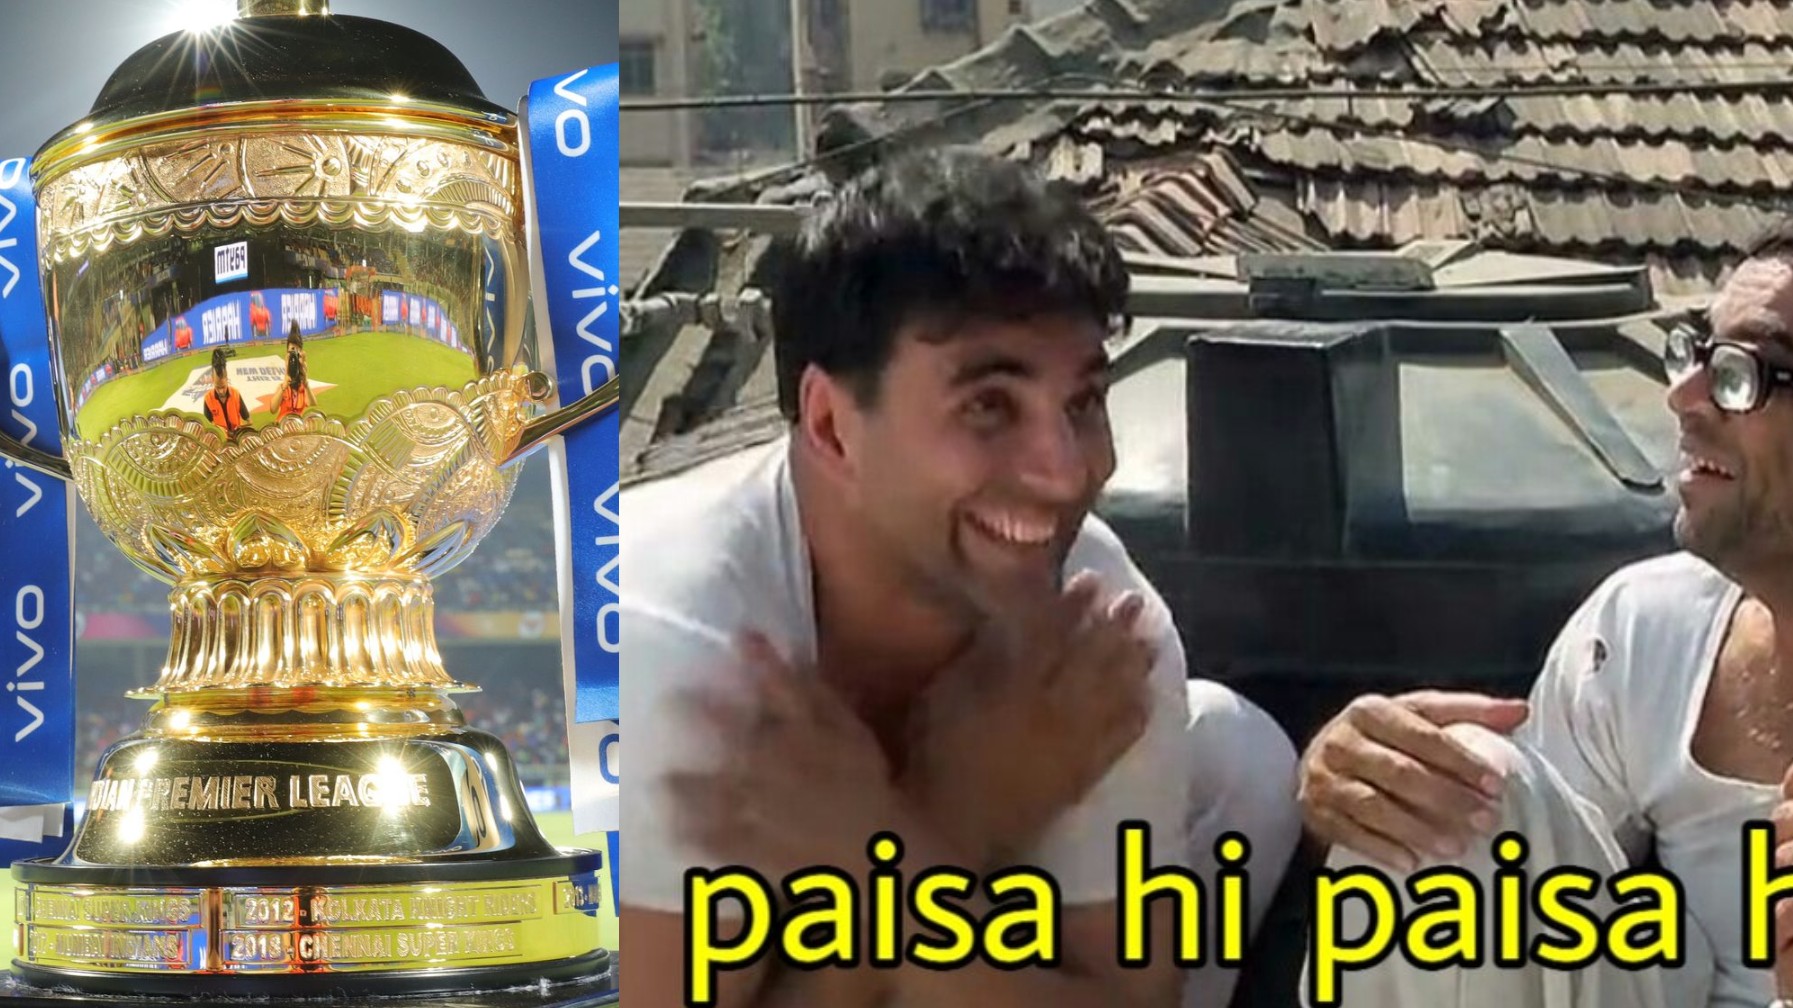 Cricket fans create hilarious memes on possibility of IPL 2020 happening in UAE